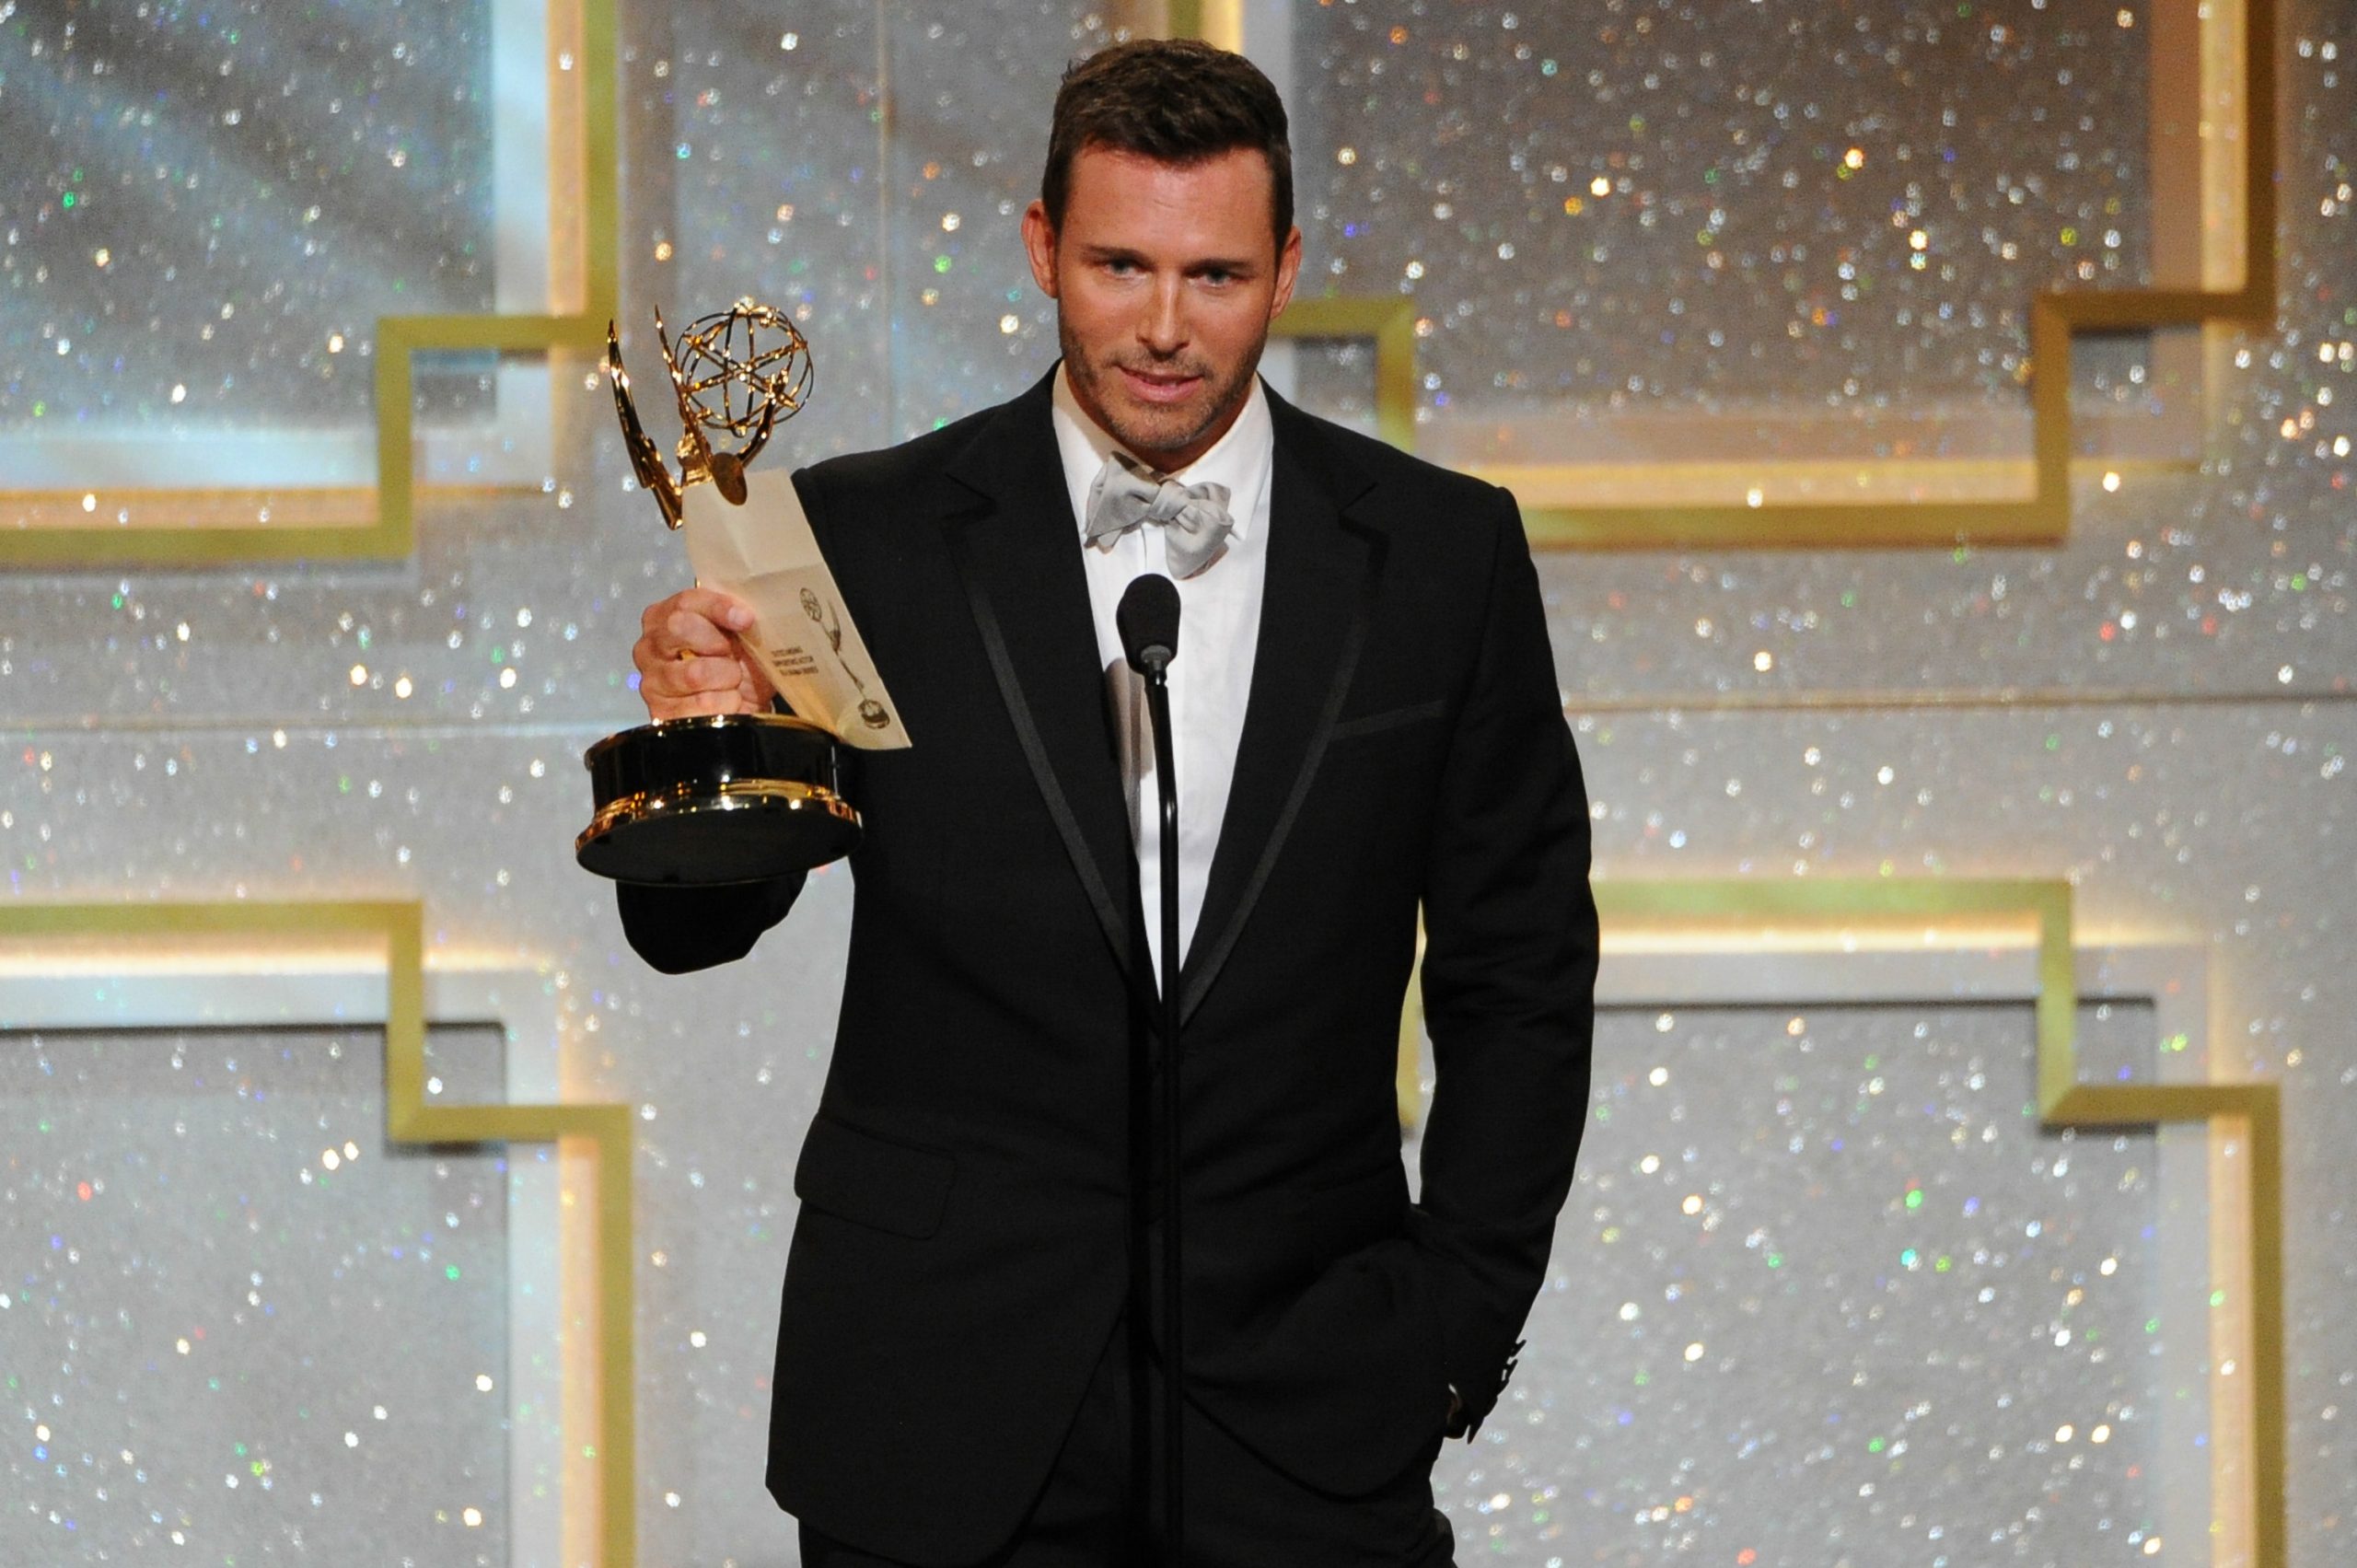 'Days of Our Lives' star Eric Martsolf is nominated for a 2022 Daytime Emmy for Lead Actor.